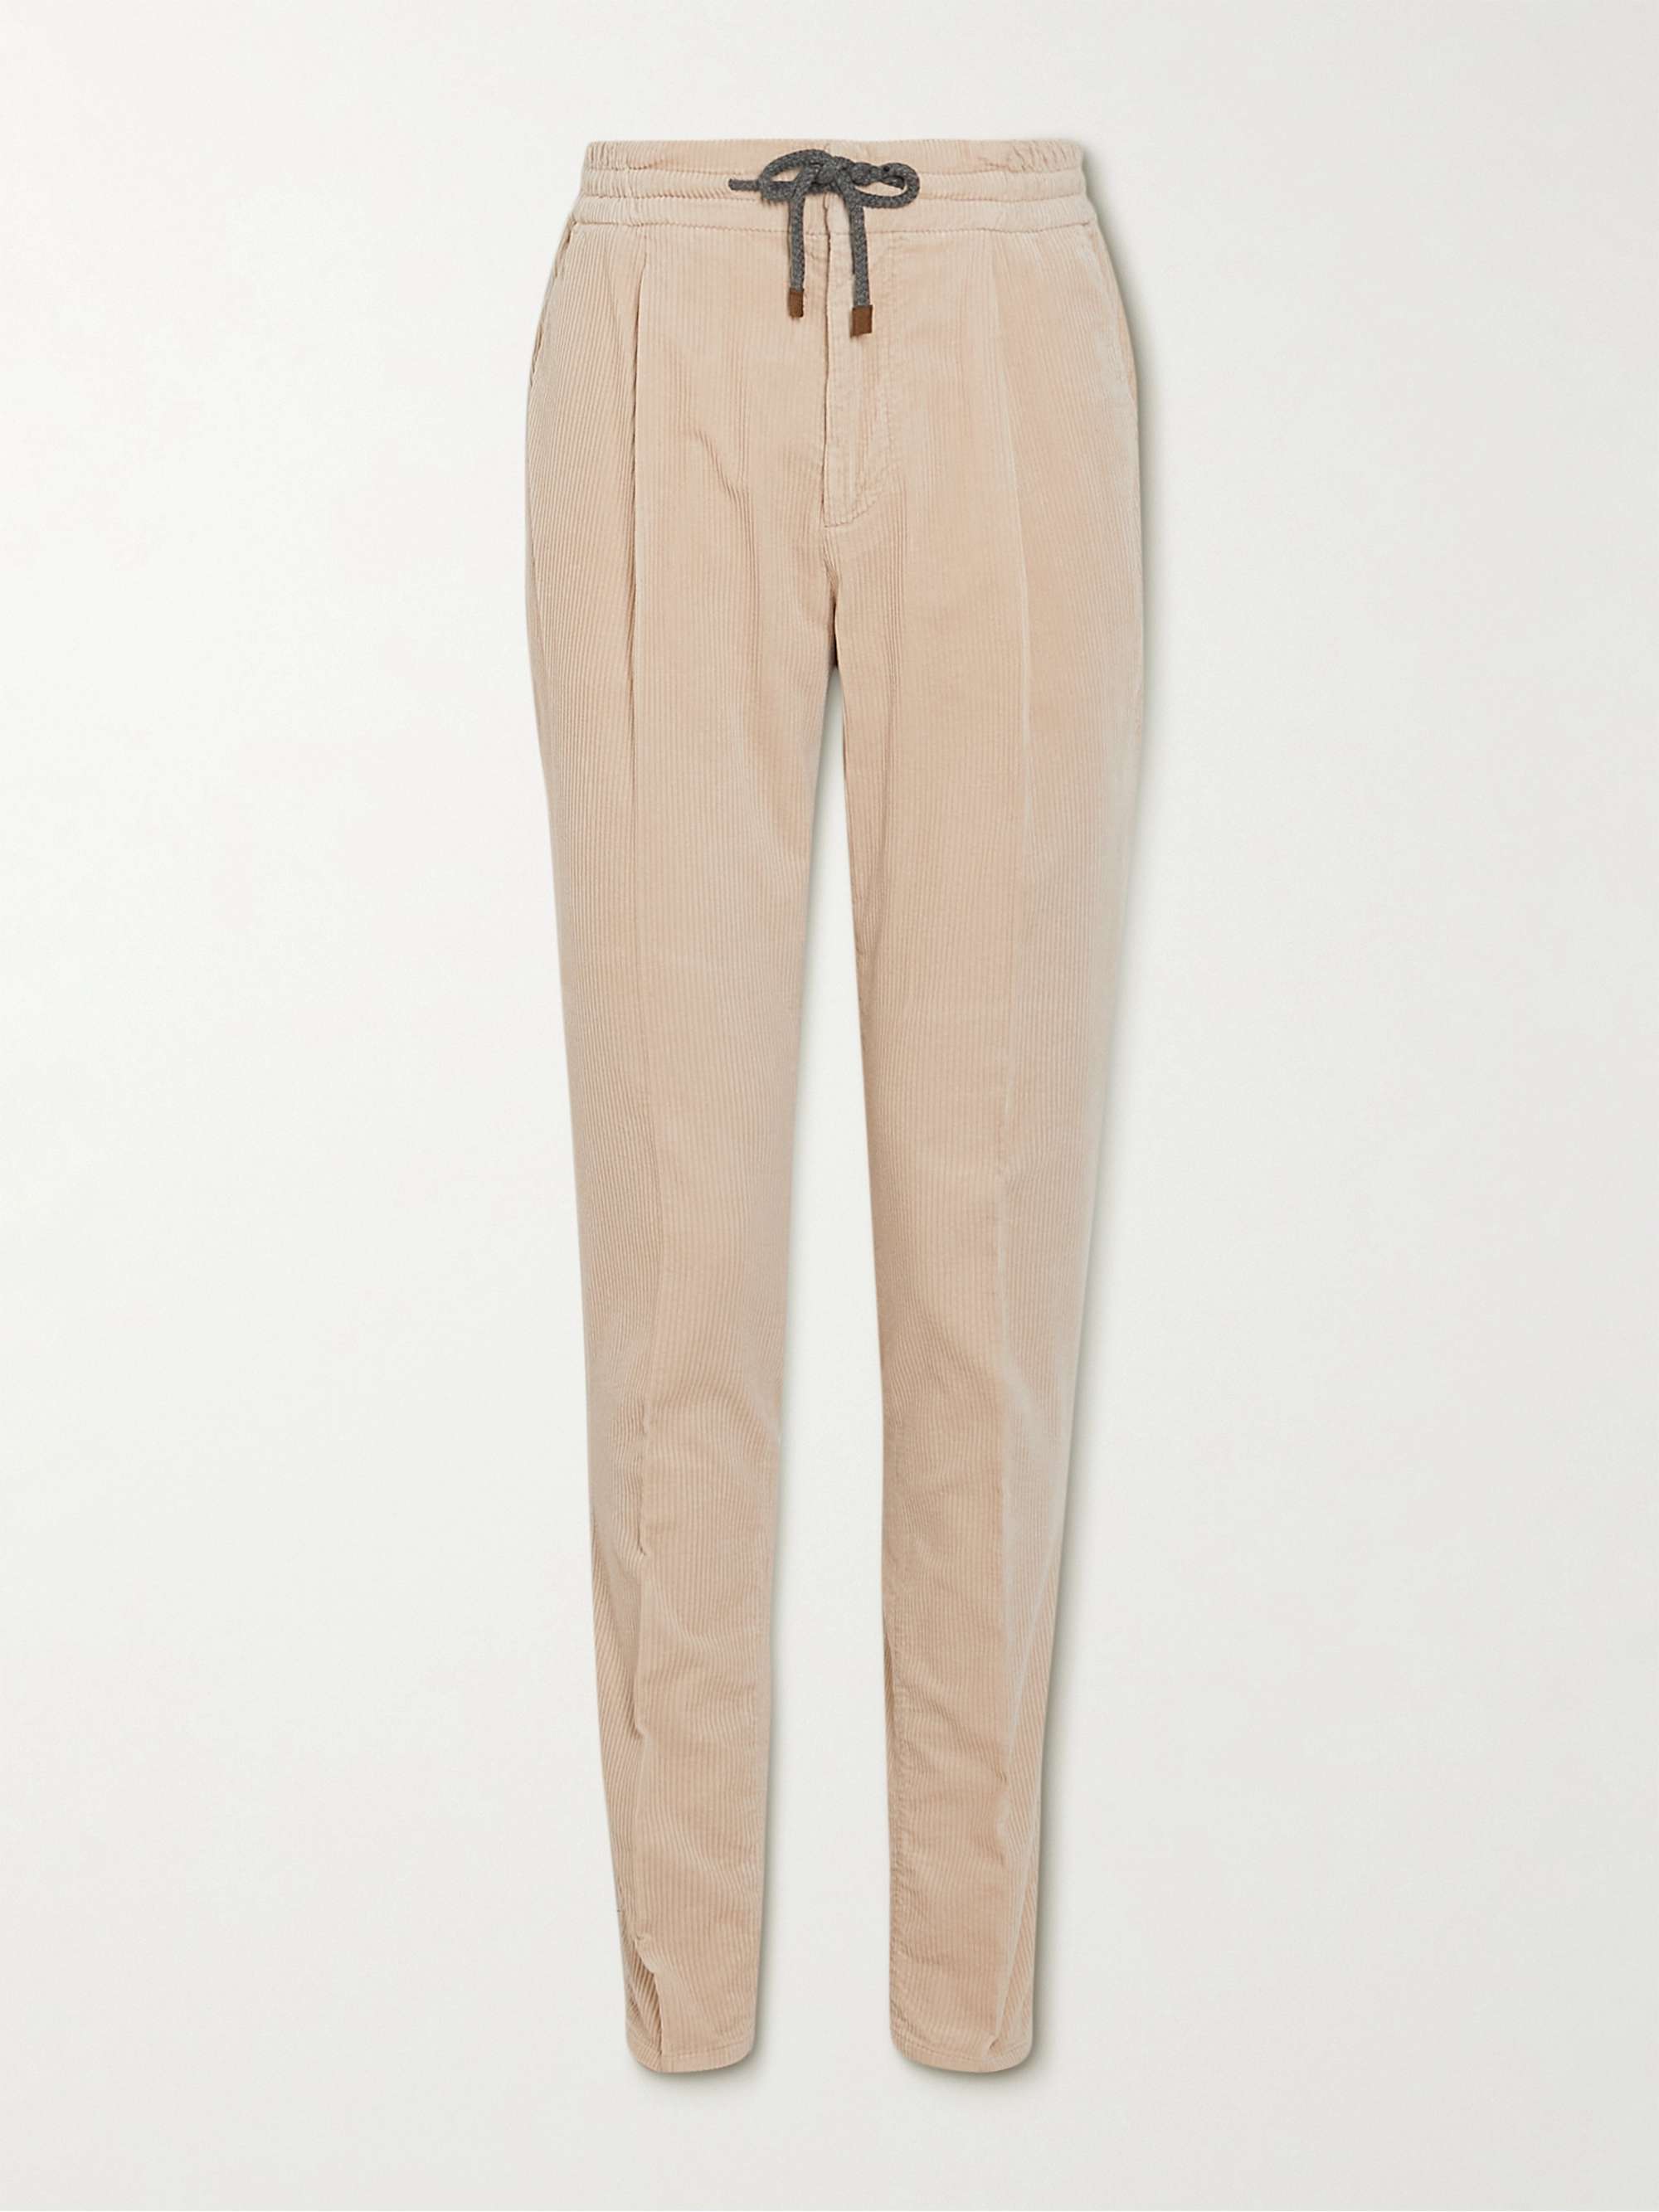 BRUNELLO CUCINELLI Tapered Cotton-Corduroy Drawstring Trousers